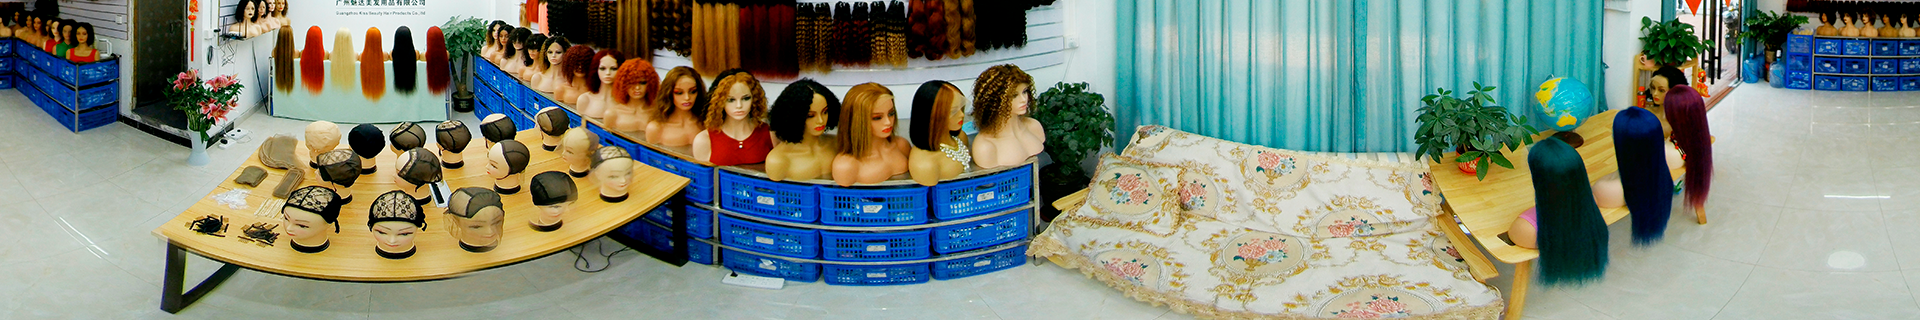 wig manufacturers, large cap wigs manufacturers, lace wig manufacturers, hair wigs manufacturer, wig manufacturers in china